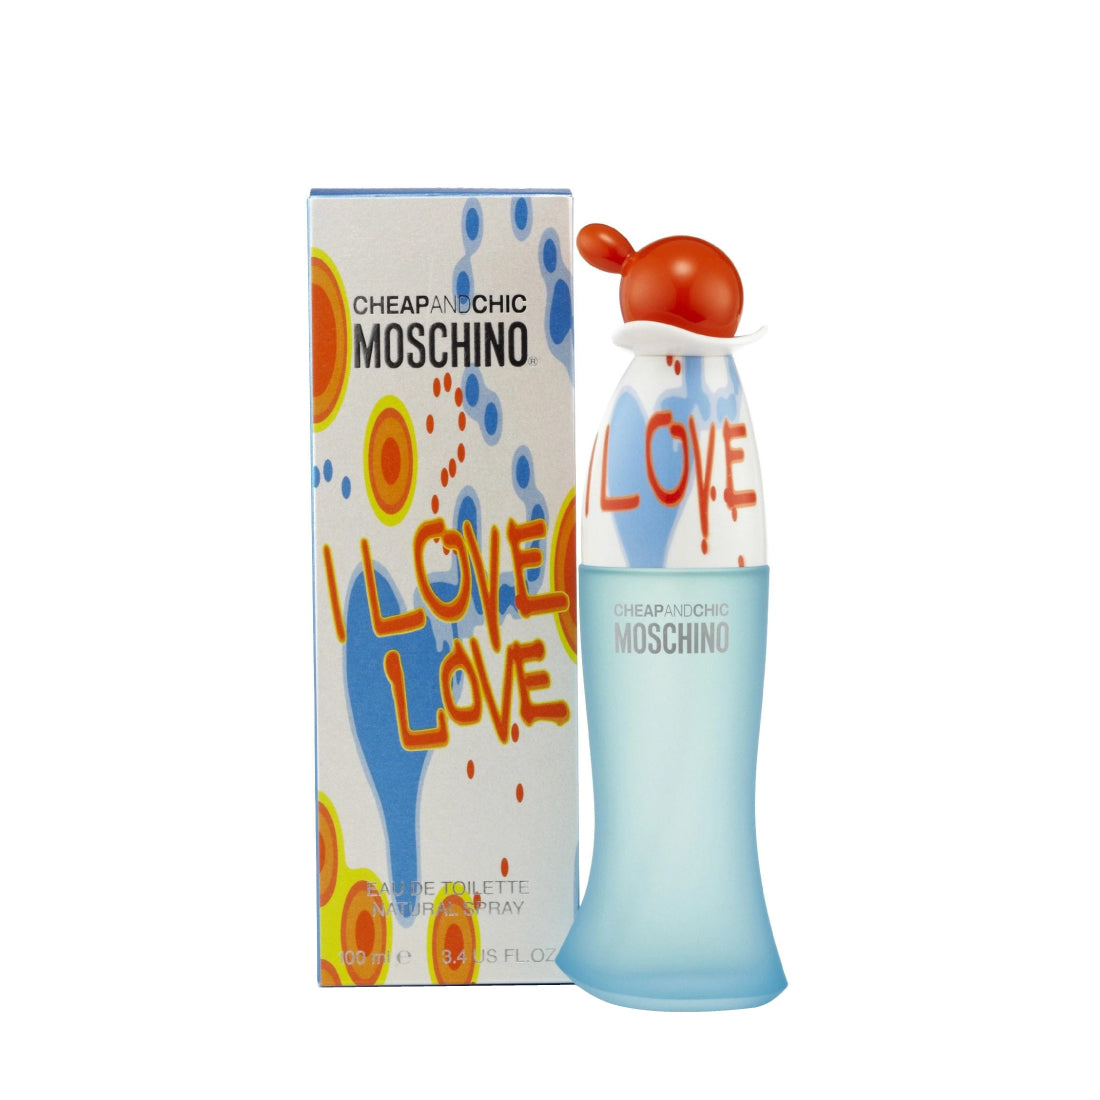 Love Plus By For Outlet – Love Spray Perfume I De Toilette Women Eau Moschino